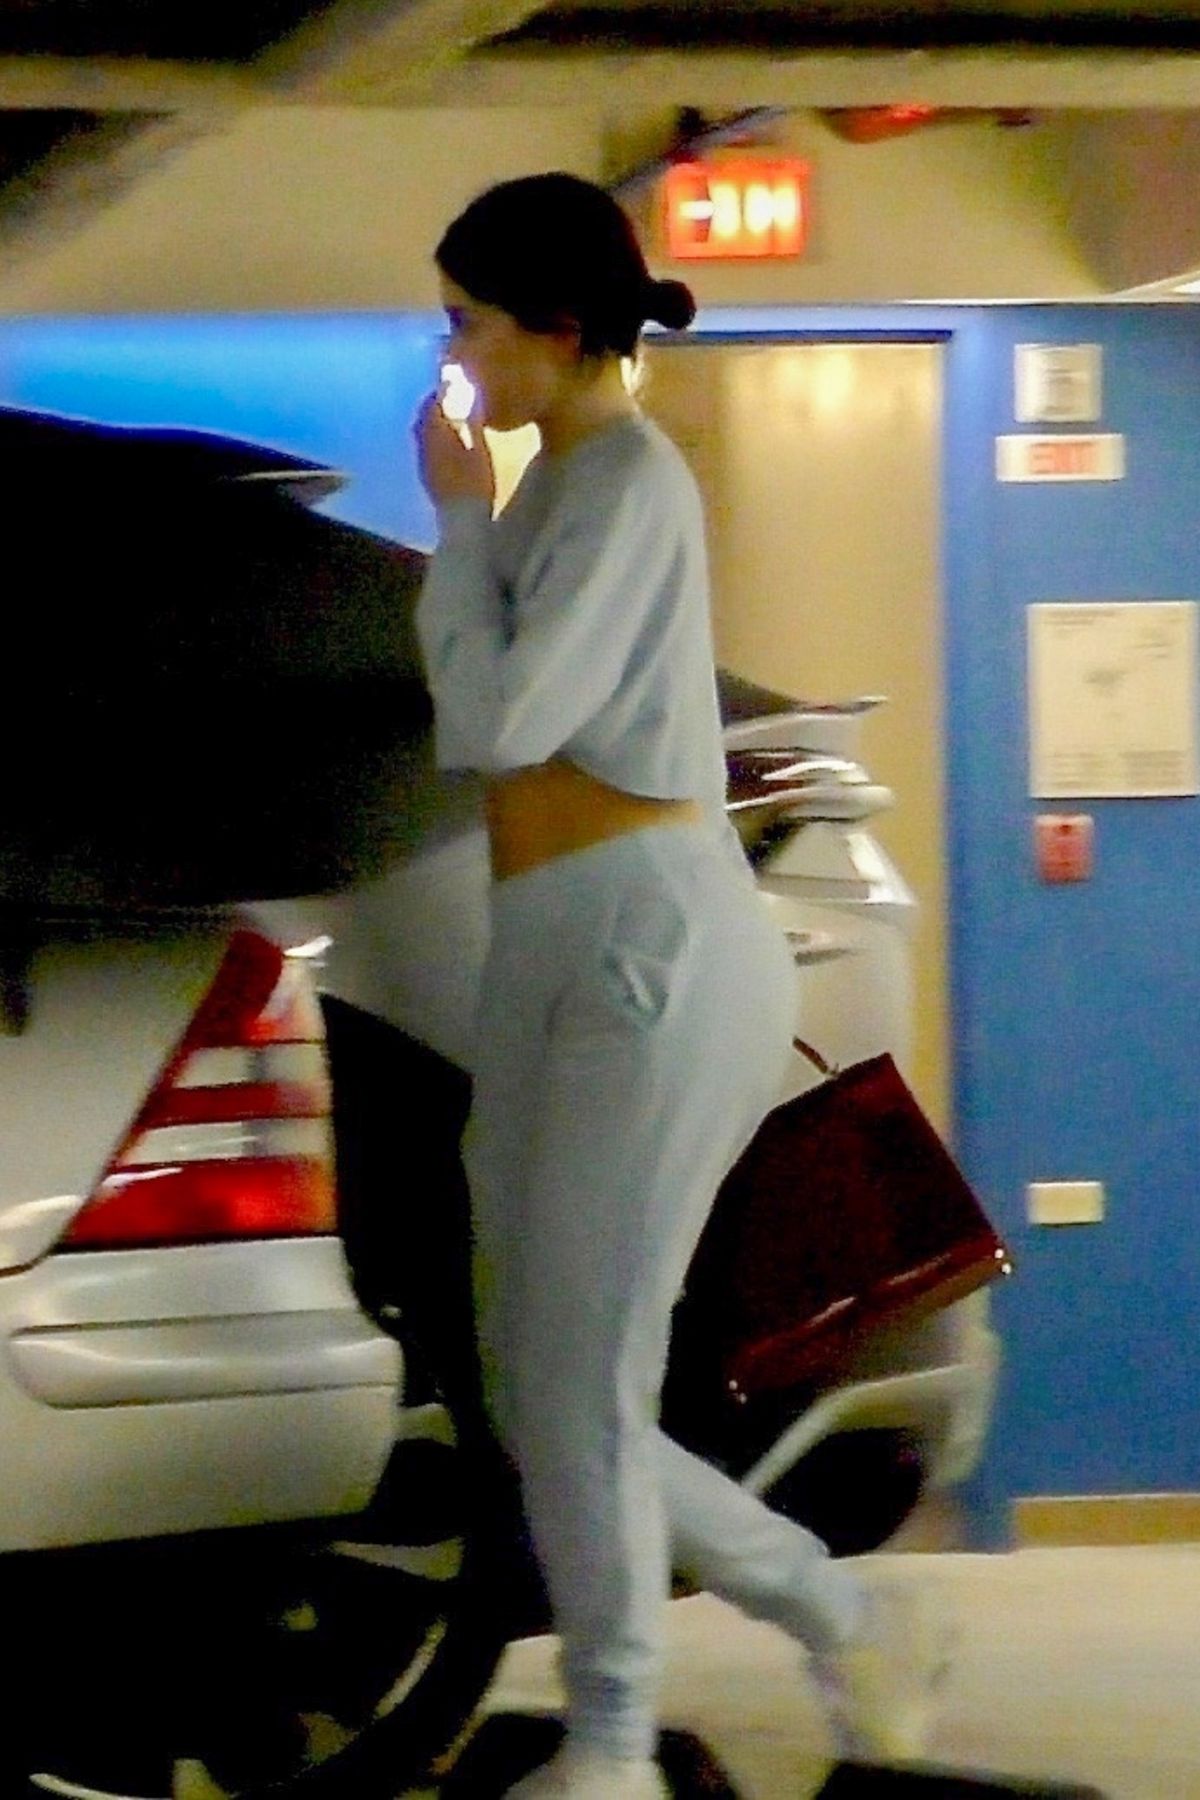 kylie-jenner-out-and-about-in-beverly-hills-05-15-2019-4.jpg